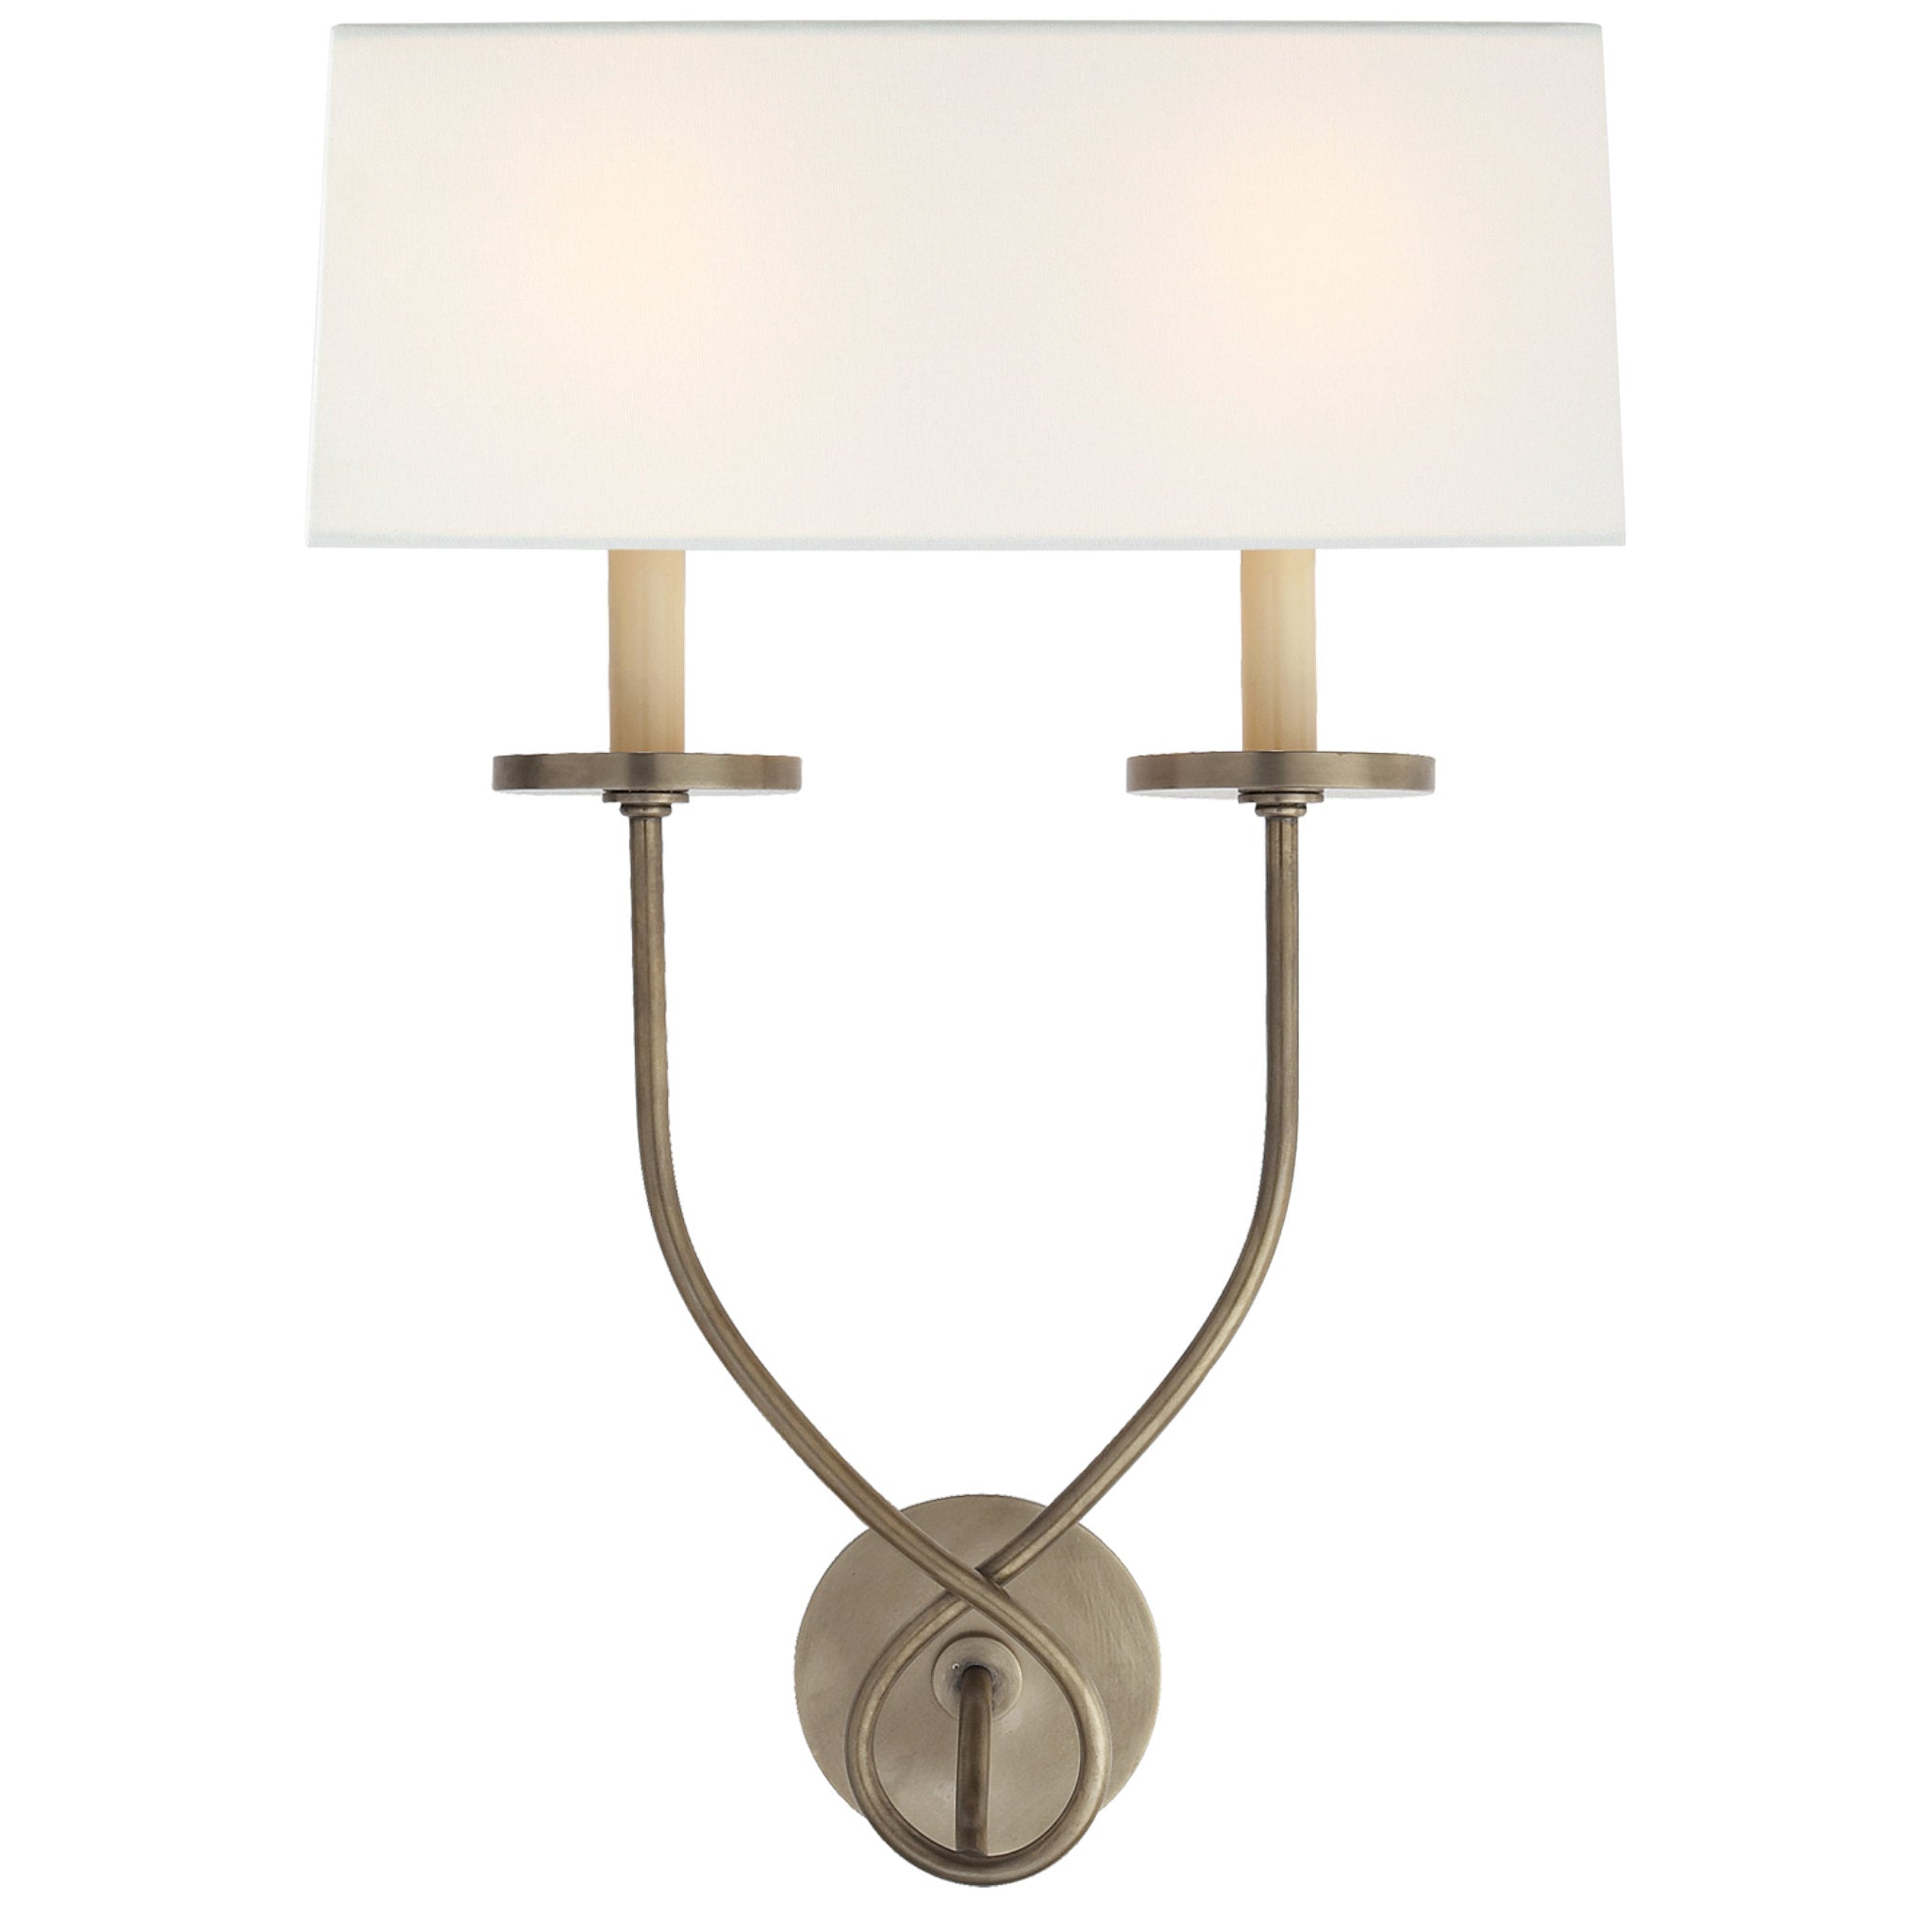 Chapman & Myers Symmetric Twist Double Sconce in Antique Nickel with Linen Shade